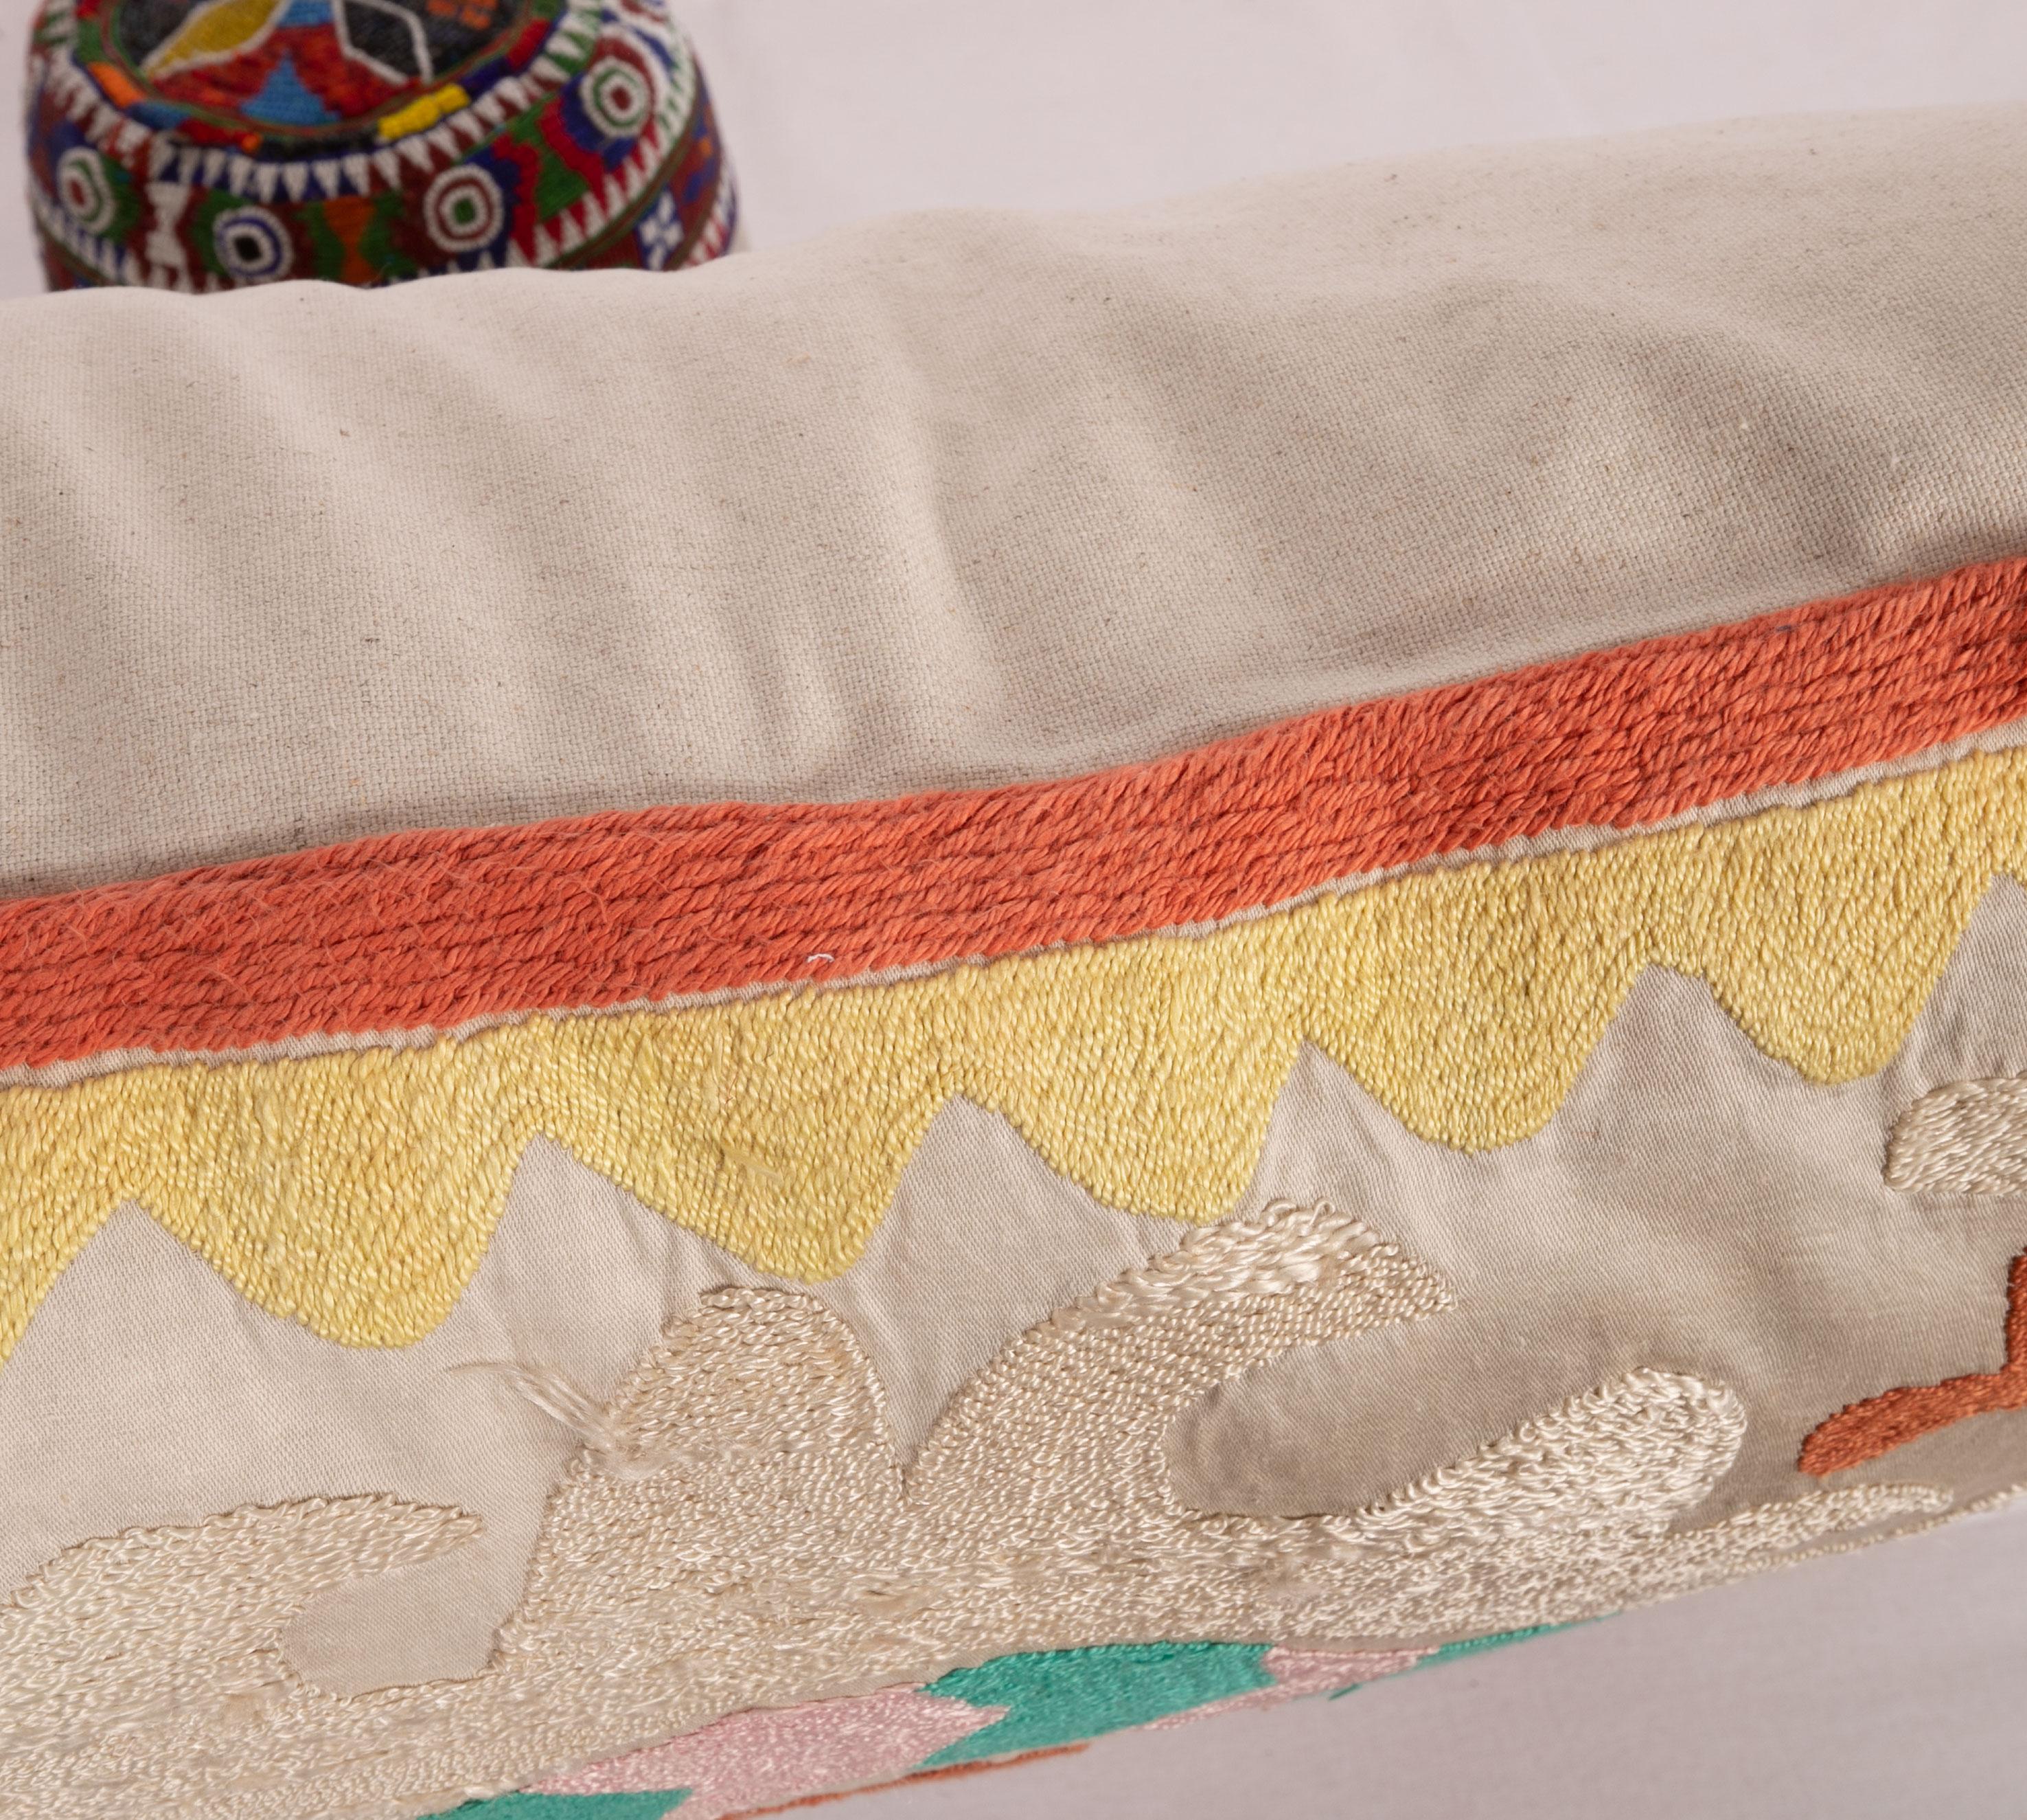 Cotton Suzani Pillow Case Made from a Tajik Suzani, Mid-20th Century For Sale